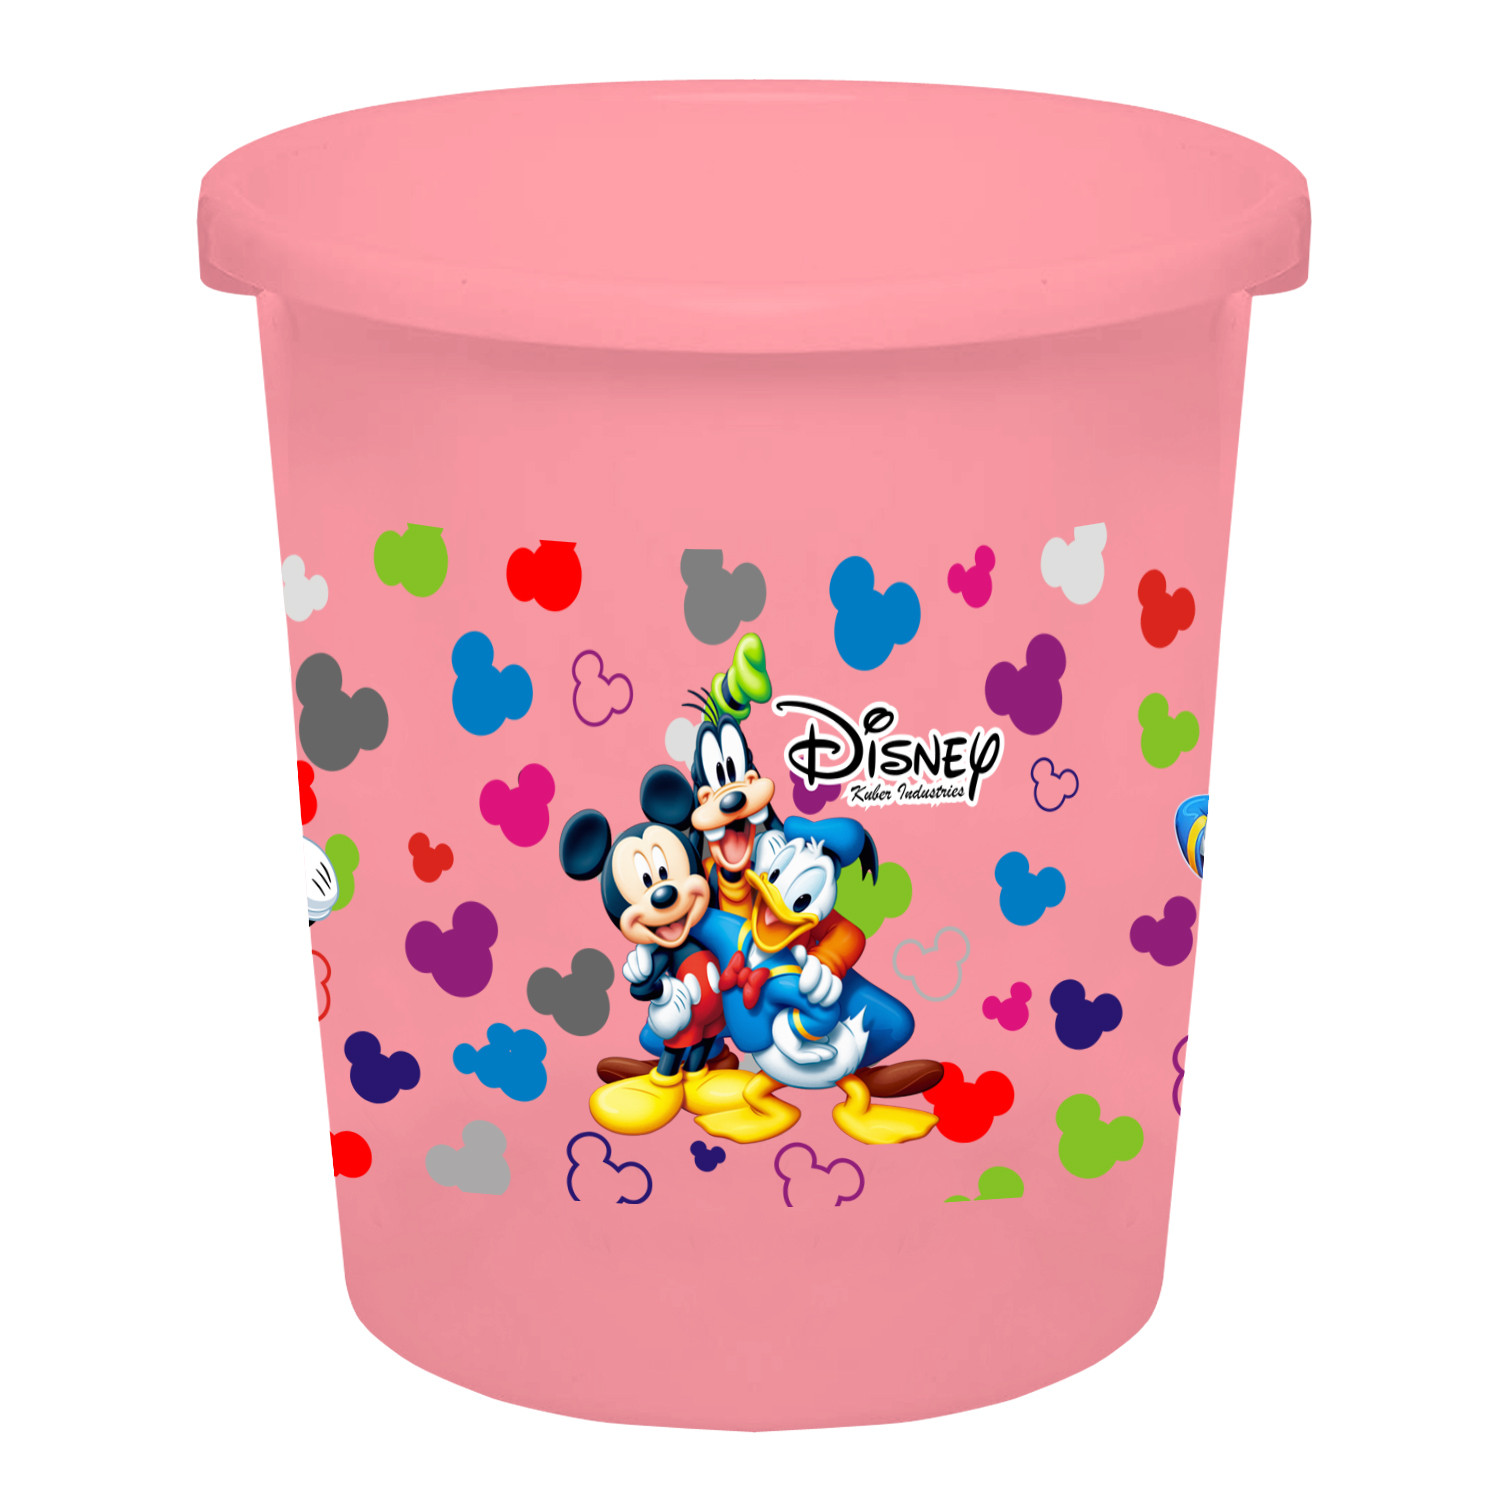 Kuber Industries Disney Team Mickey Print Plastic 2 Pieces Garbage Waste Dustbin/Recycling Bin for Home, Office, Factory, 5 Liters (Pink & Cream) -HS_35_KUBMART17345